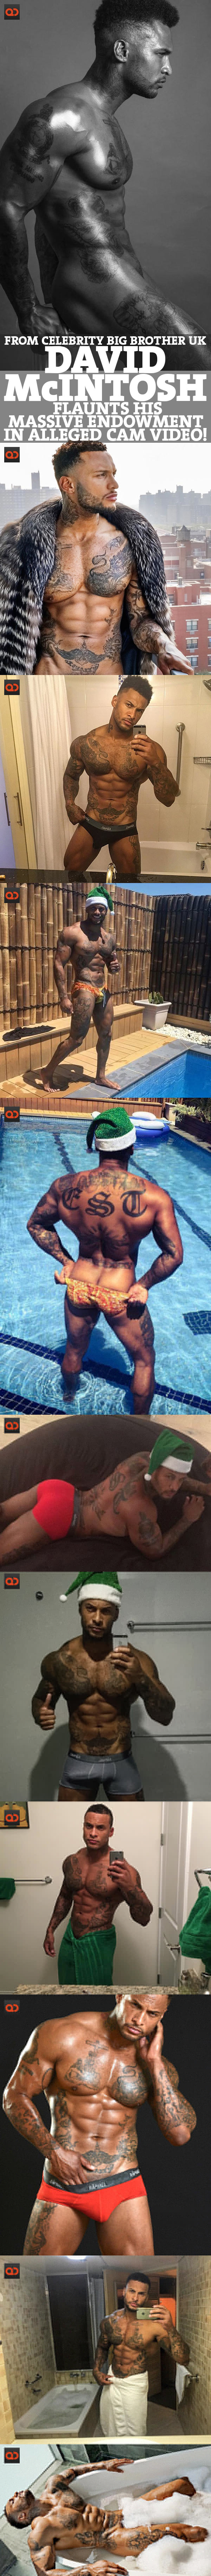 David Mcintosh, From Celebrity Big Brother UK, Flaunts His Massive Endowment In Alleged Cam Video!